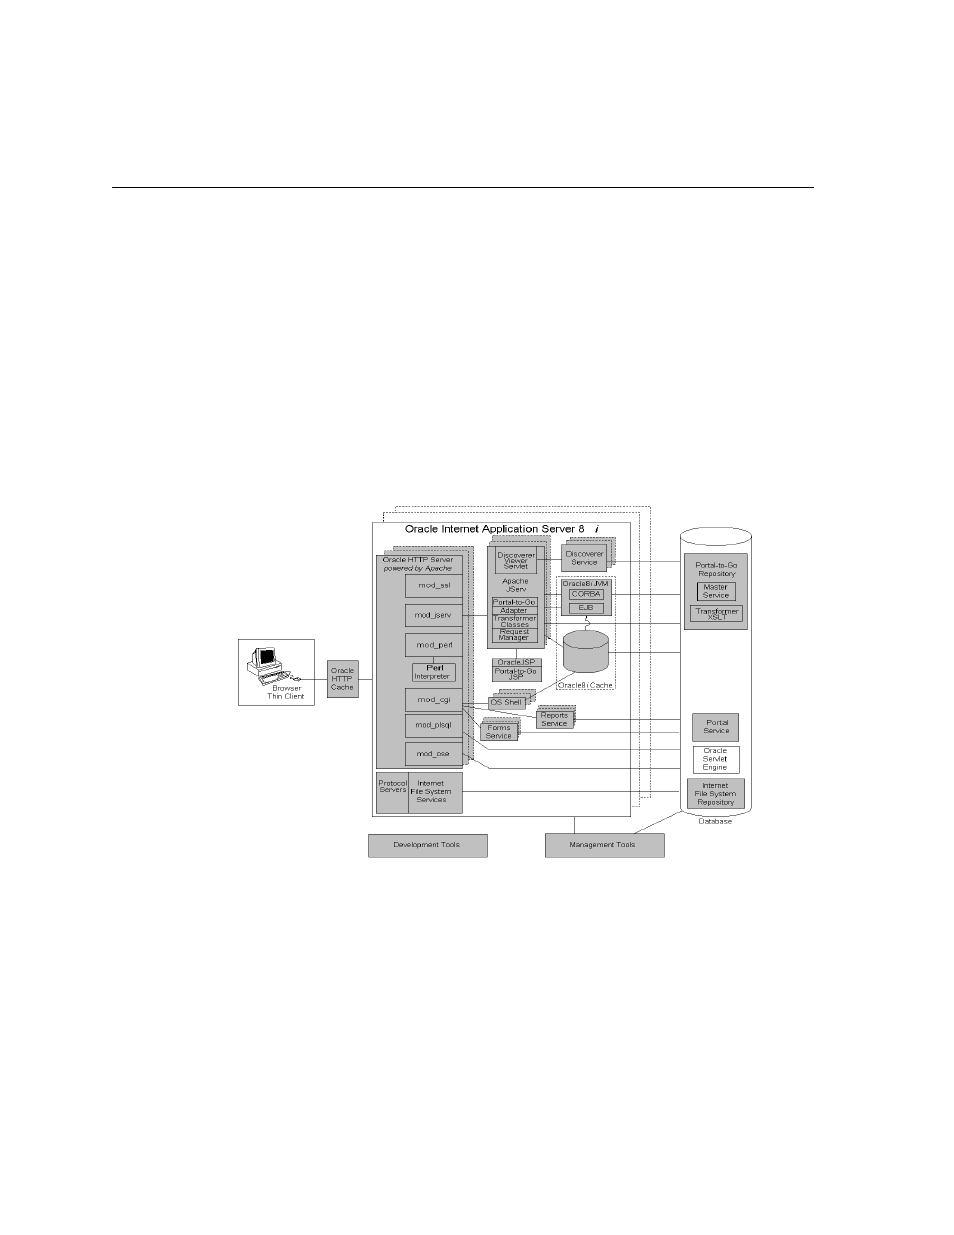 Architecture | Oracle Audio Technologies A86828-01 User Manual | Page 22 / 68